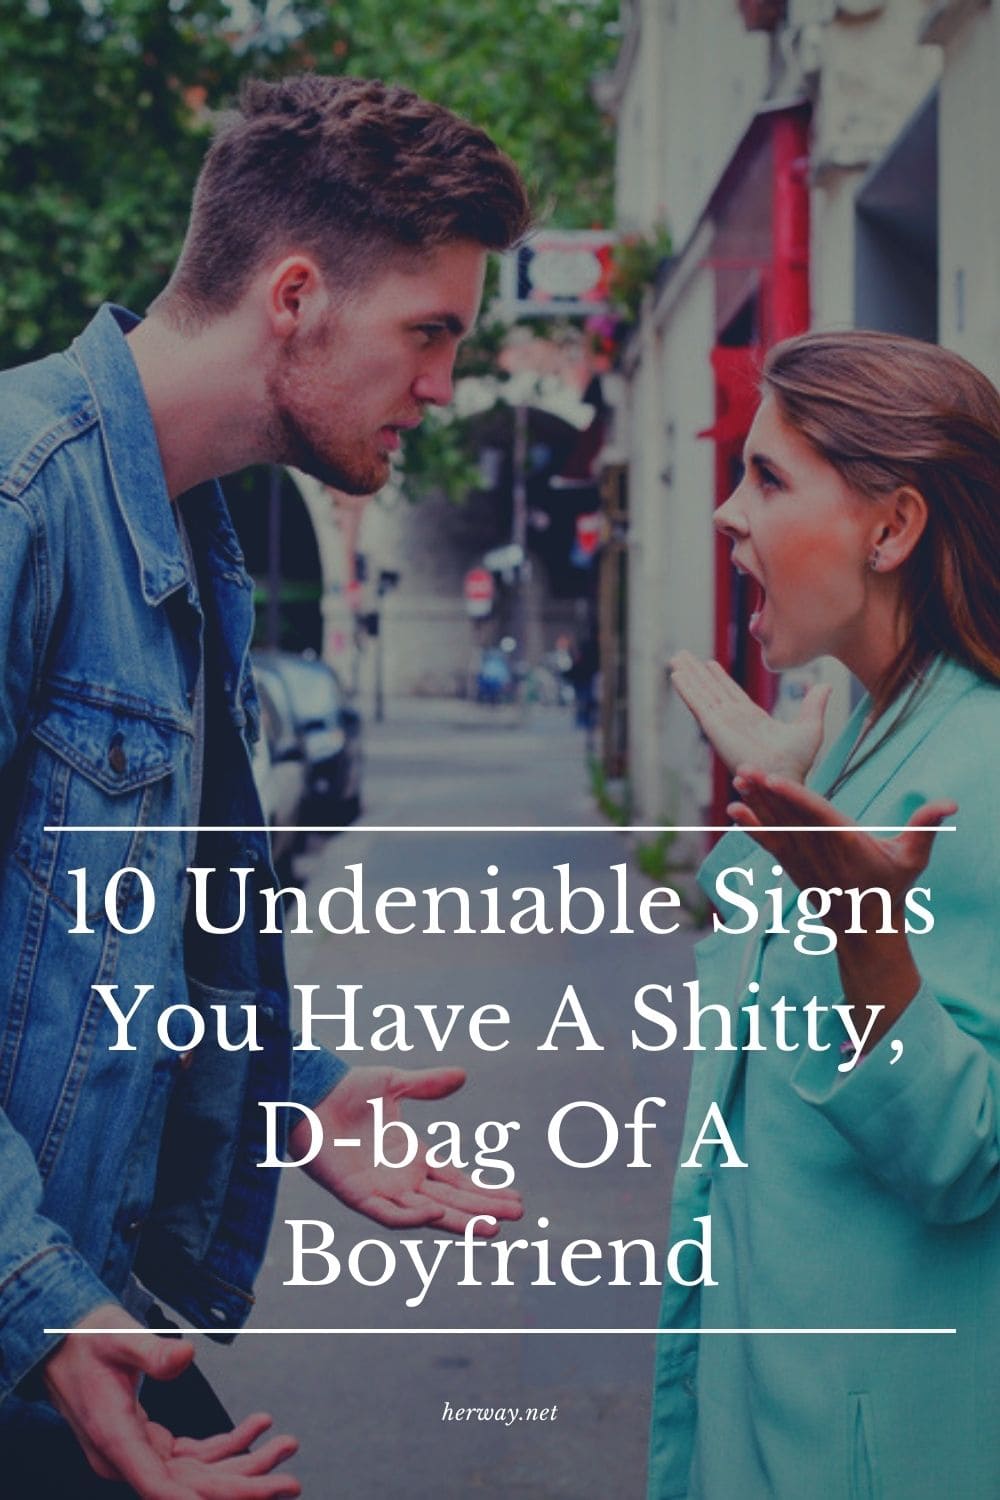 10 Undeniable Signs You Have A Shitty, D-bag Of A Boyfriend